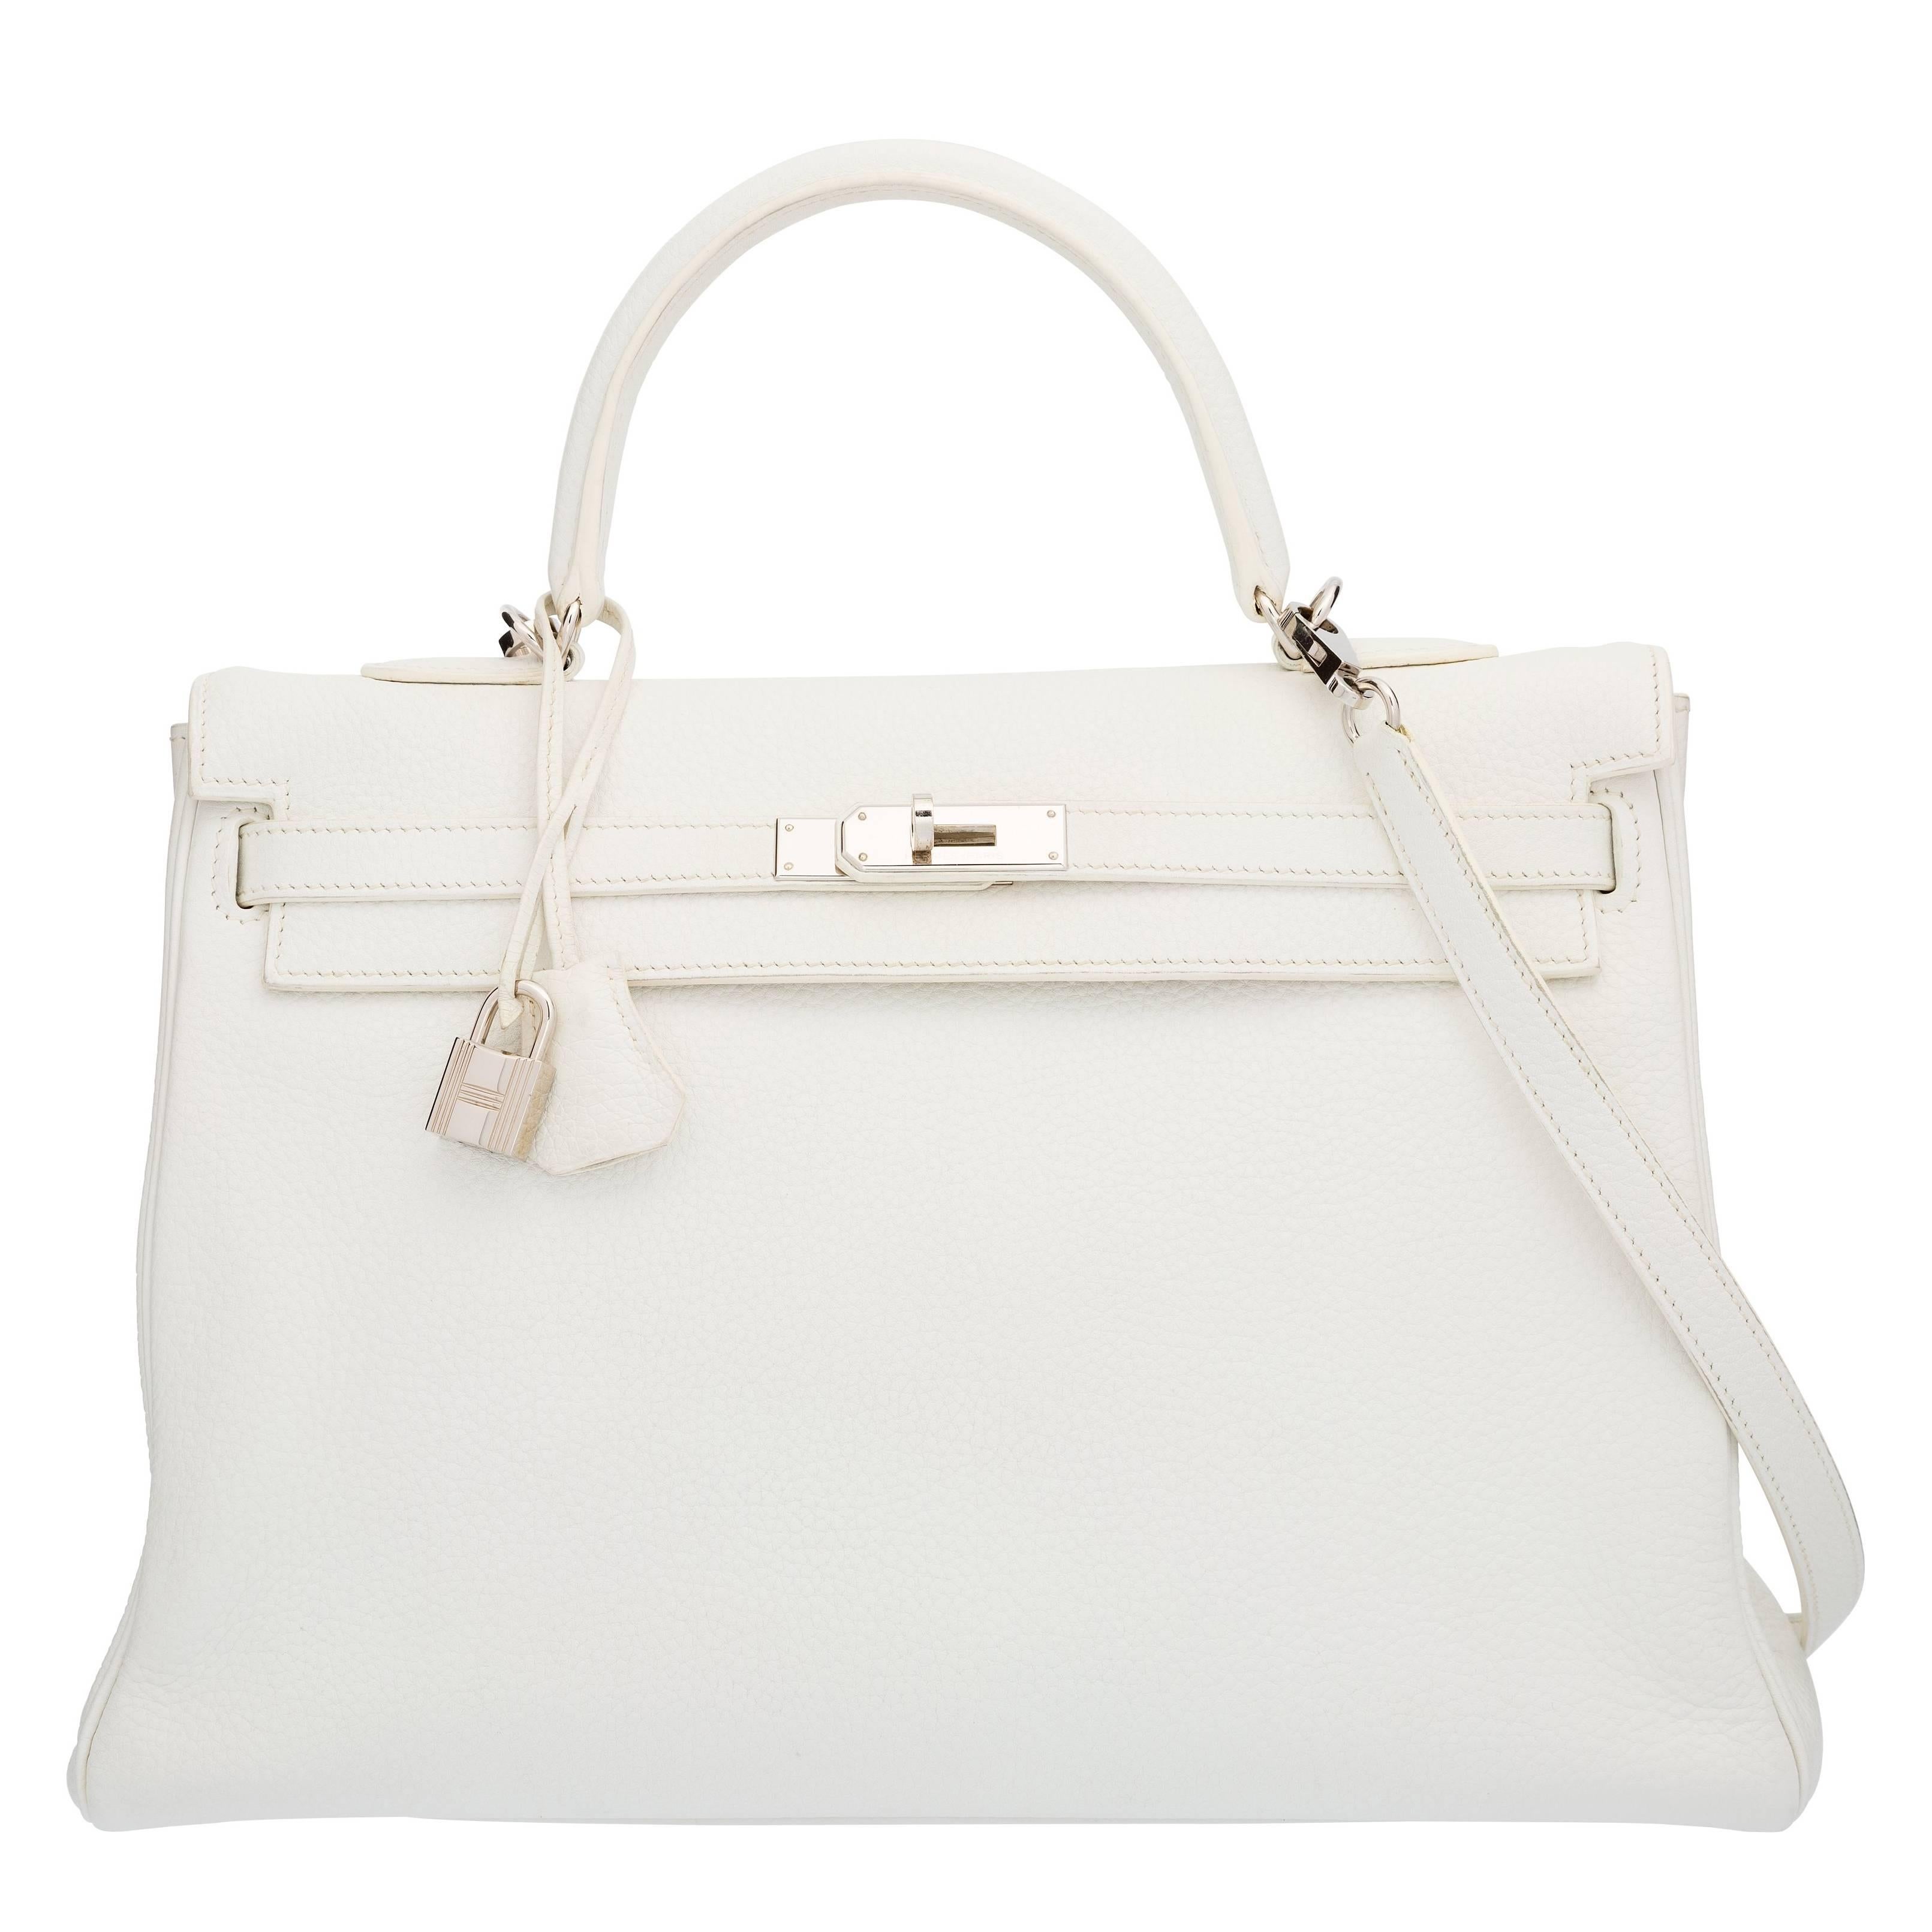 Hermes 35cm White Clemence Leather Retourne Kelly Bag with Palladium Hardware For Sale